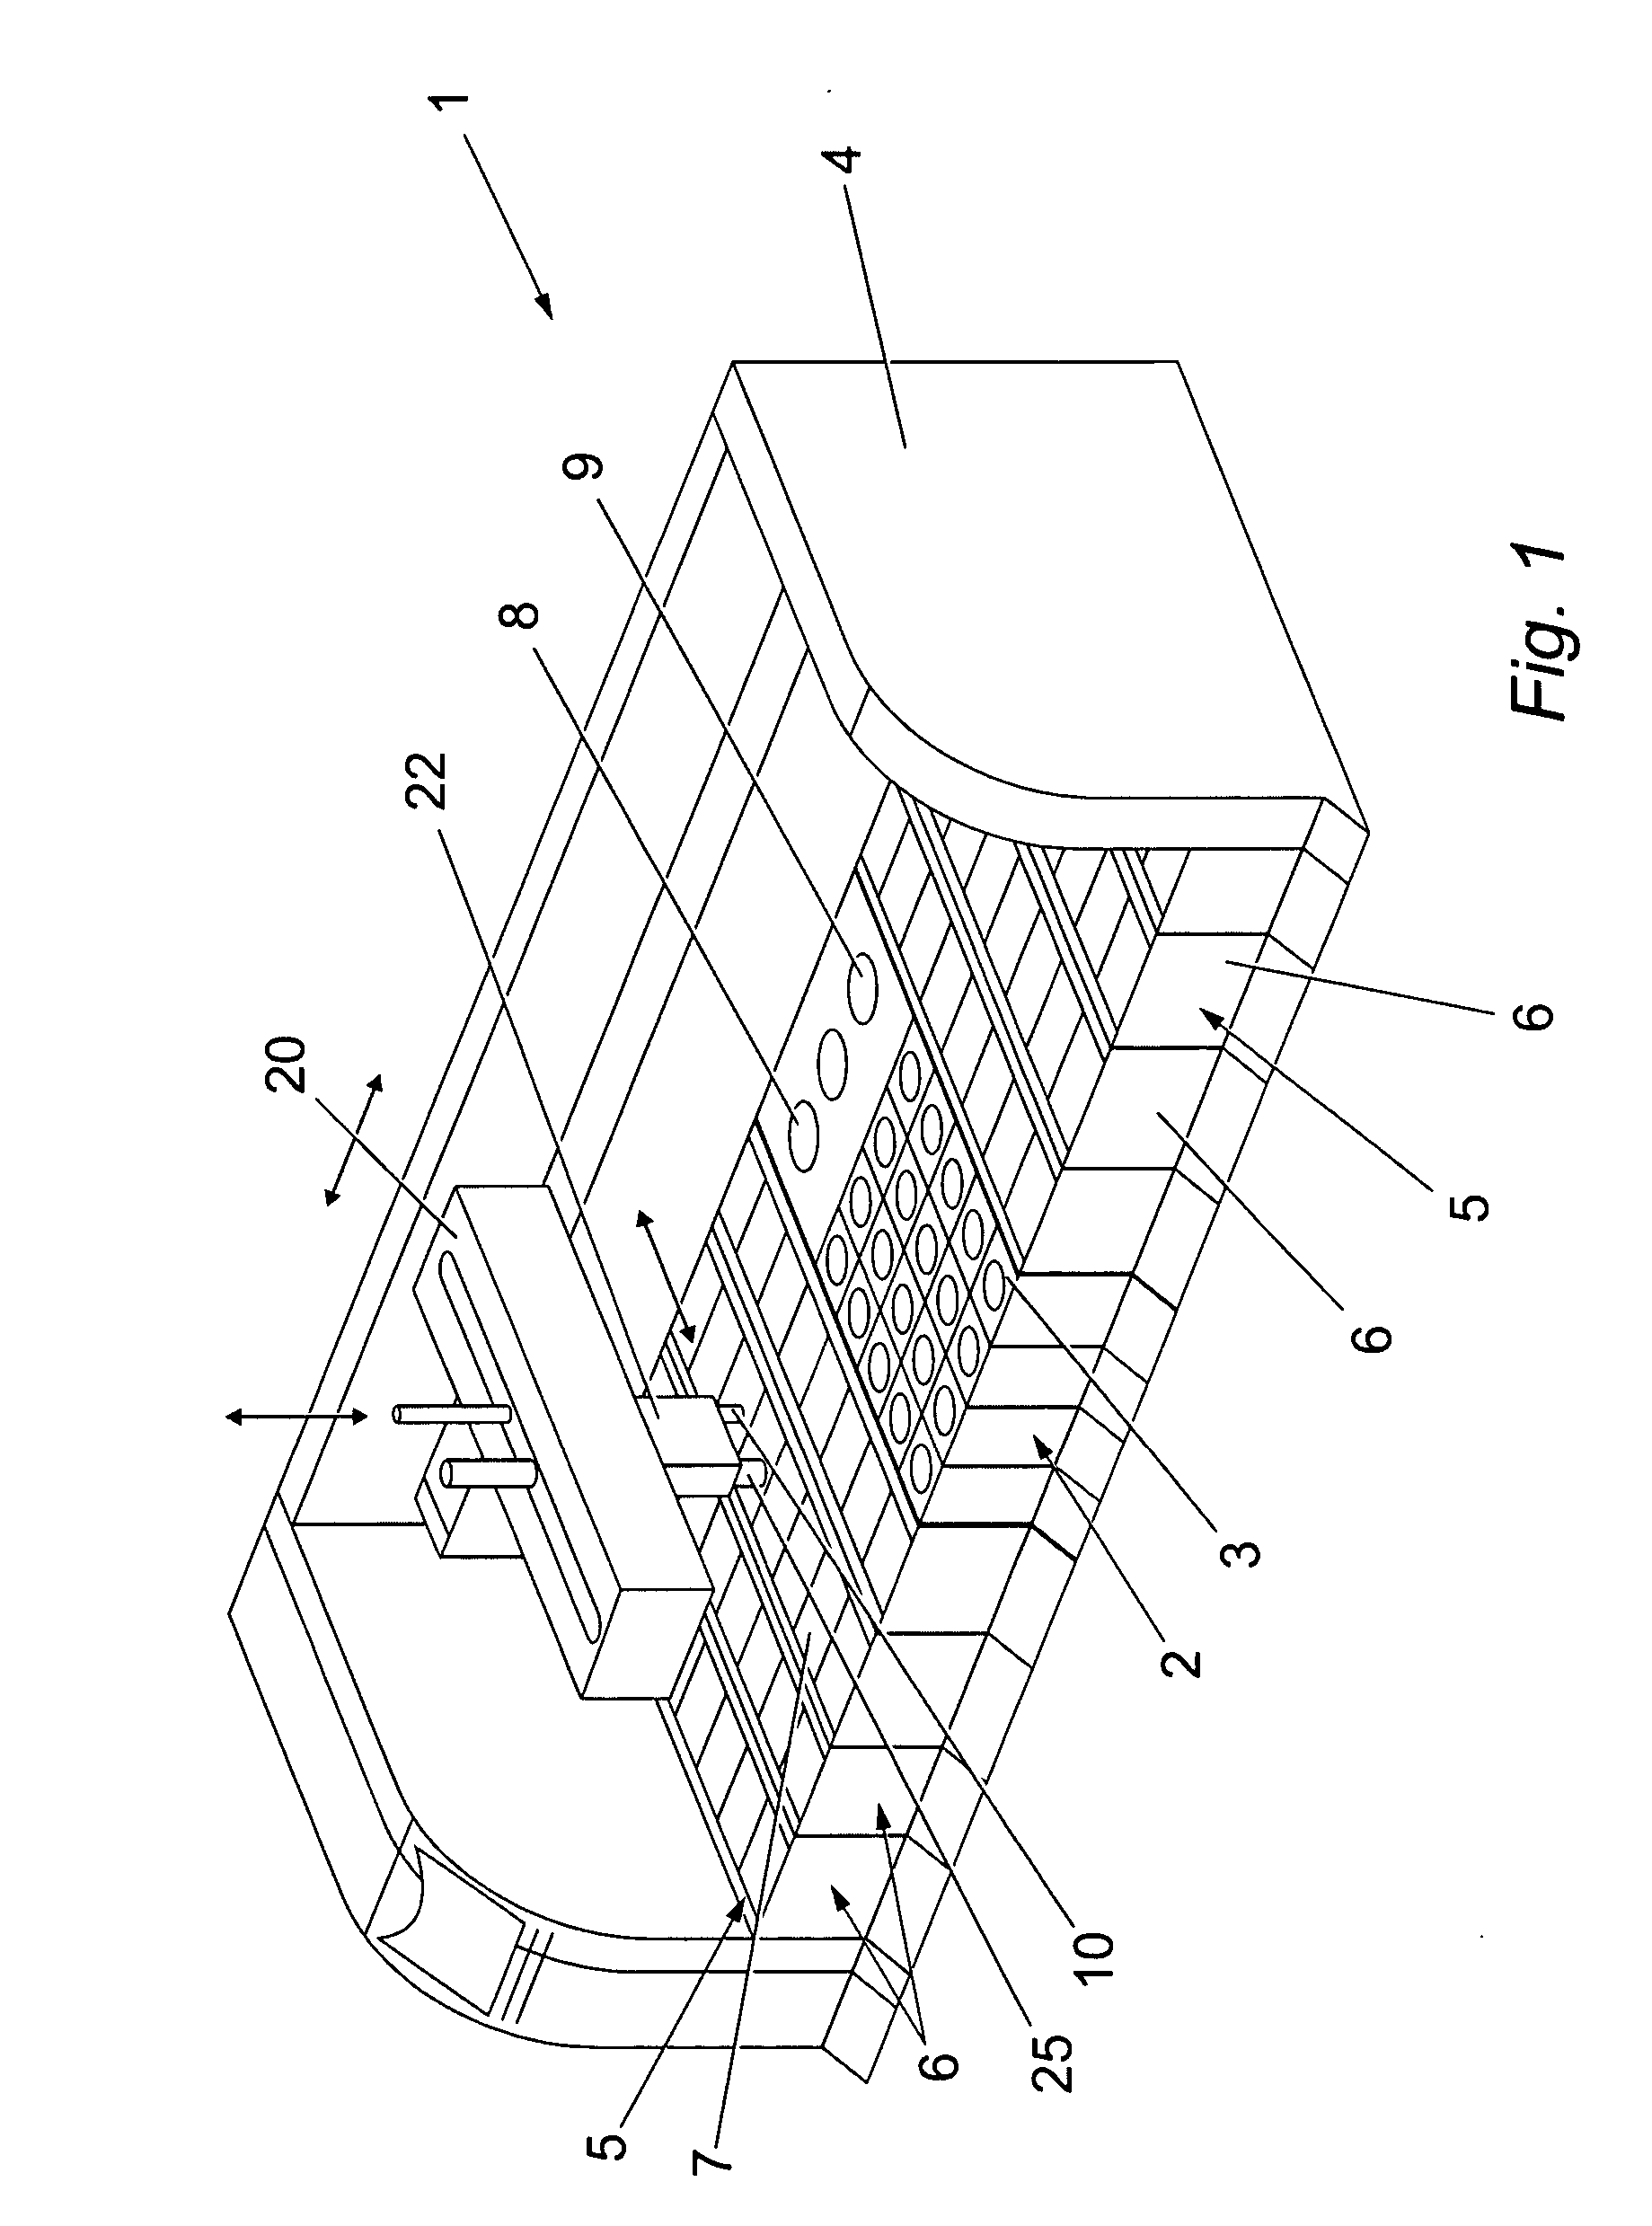 Method and apparatus for pretreatment of tissue slides